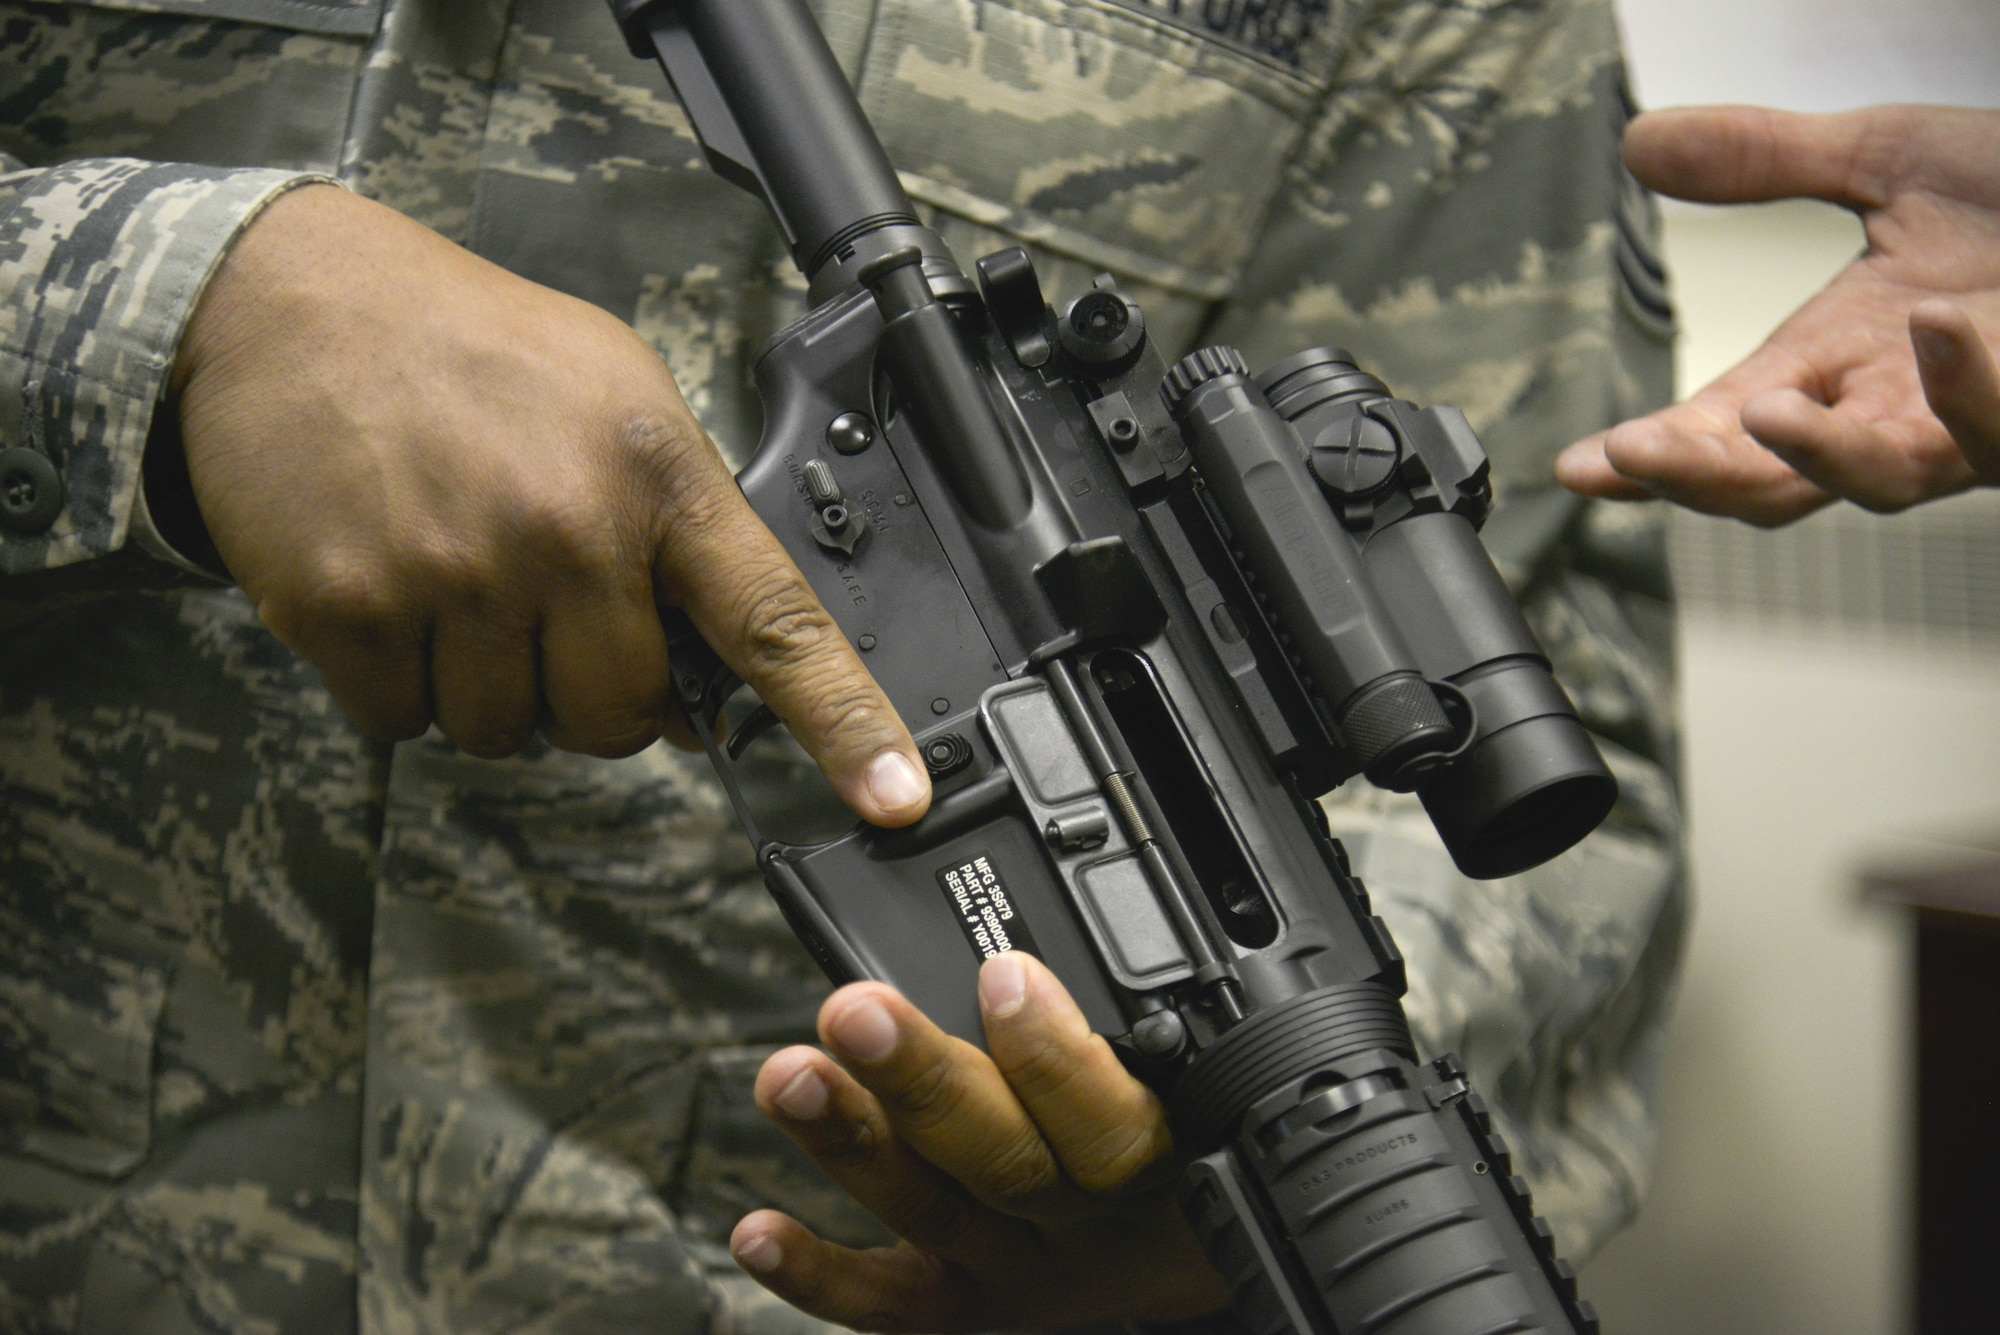 Tech. Sgt. Dwayne Harrell, 92nd Communications Squadron unit deployment manager, ensures the chamber of an M4 Carbine Assault Rifle is clear during Operation M4 April 6, 2015, at Fairchild Air Force Base, Wash. Combat arms instructors from the 92nd Security Forces Squadron accompanied  Chief Master Sgt. Christian Pugh, 92nd Air Refueling Squadron command chief, and other chief master sergeants to test Airmen's knowledge on how to use the weapon. (U.S. Air Force photo/Senior Airman Janelle Patiño)